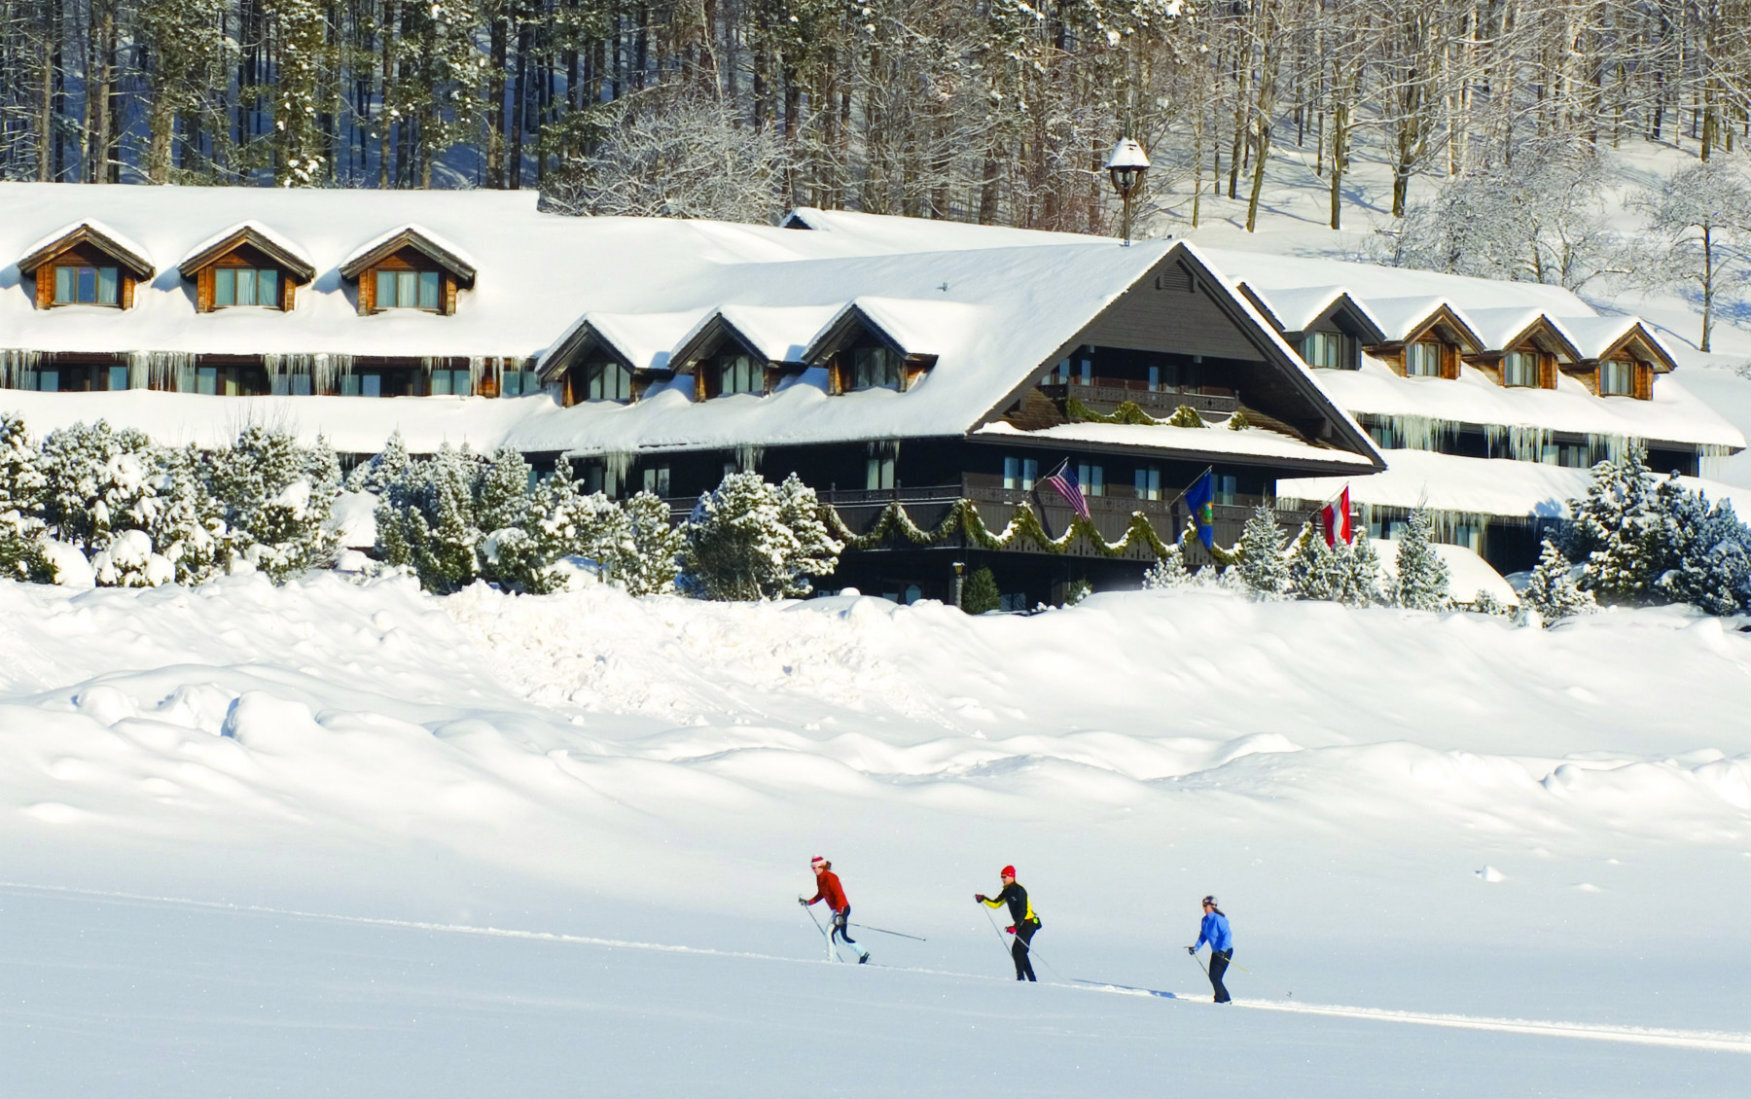 Skiing at our Resort in Stowe with our Seasonal Ski Pass